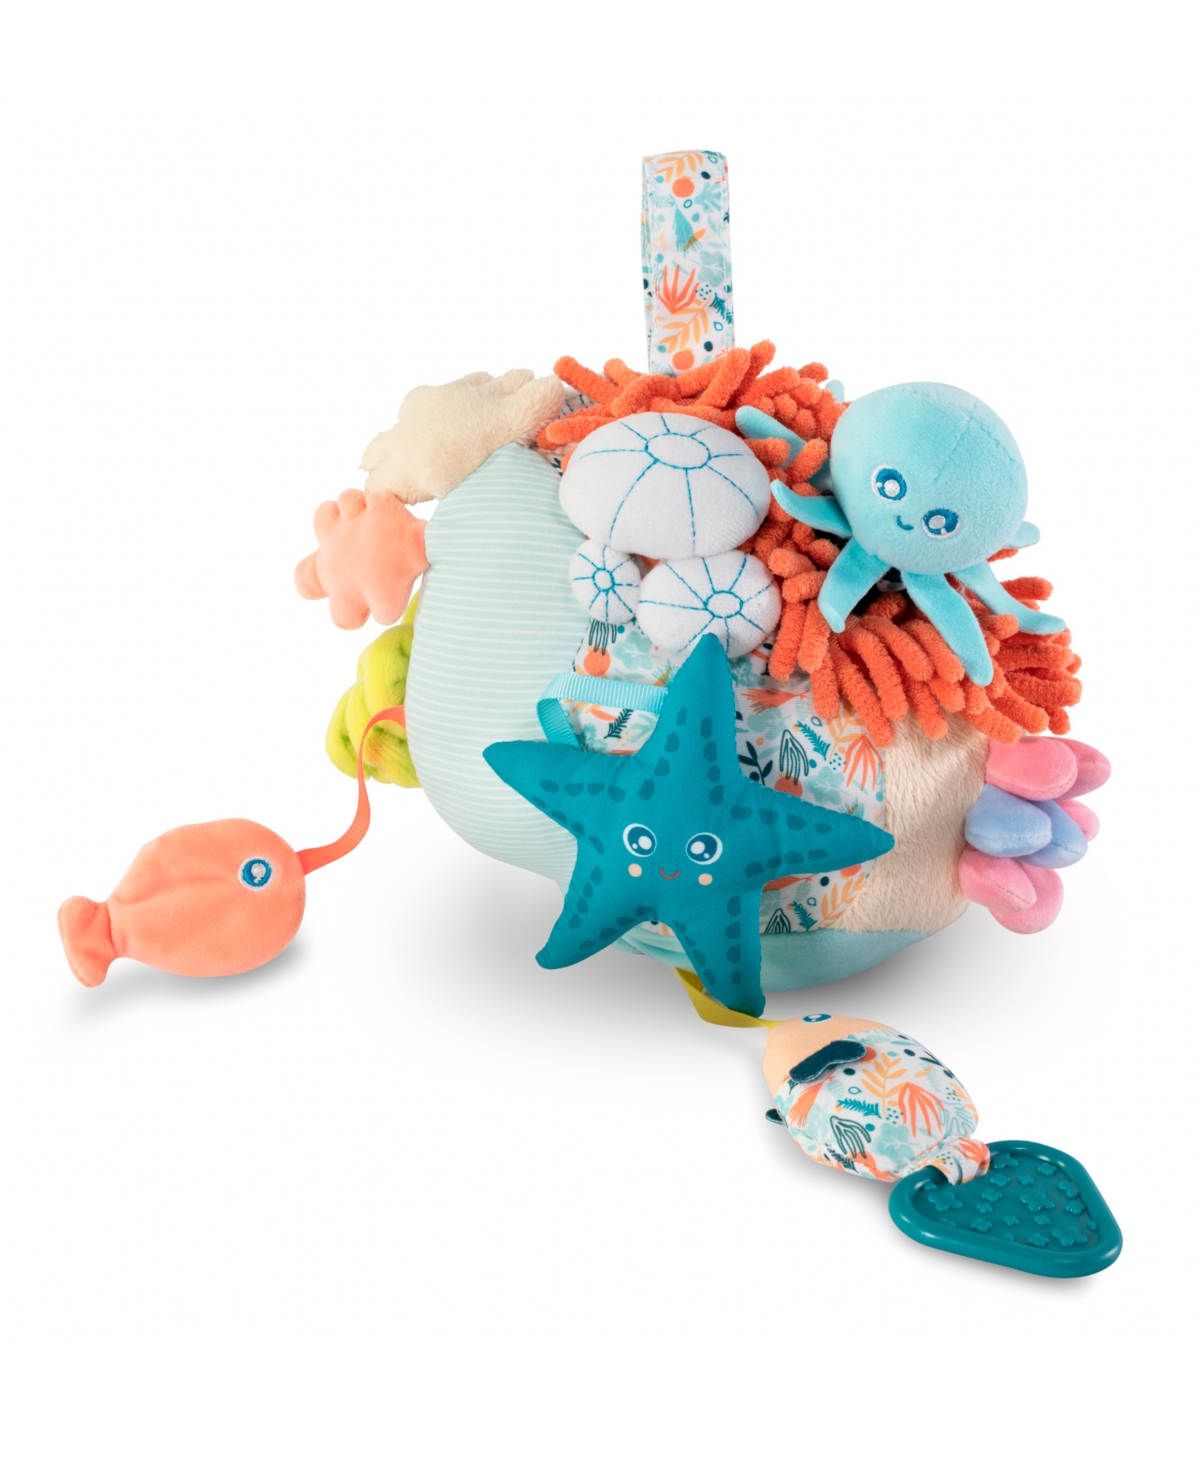 Shop Miniland Sensorial Reef; Sensory Stimulation For Baby-multipurpose Toy In No Color